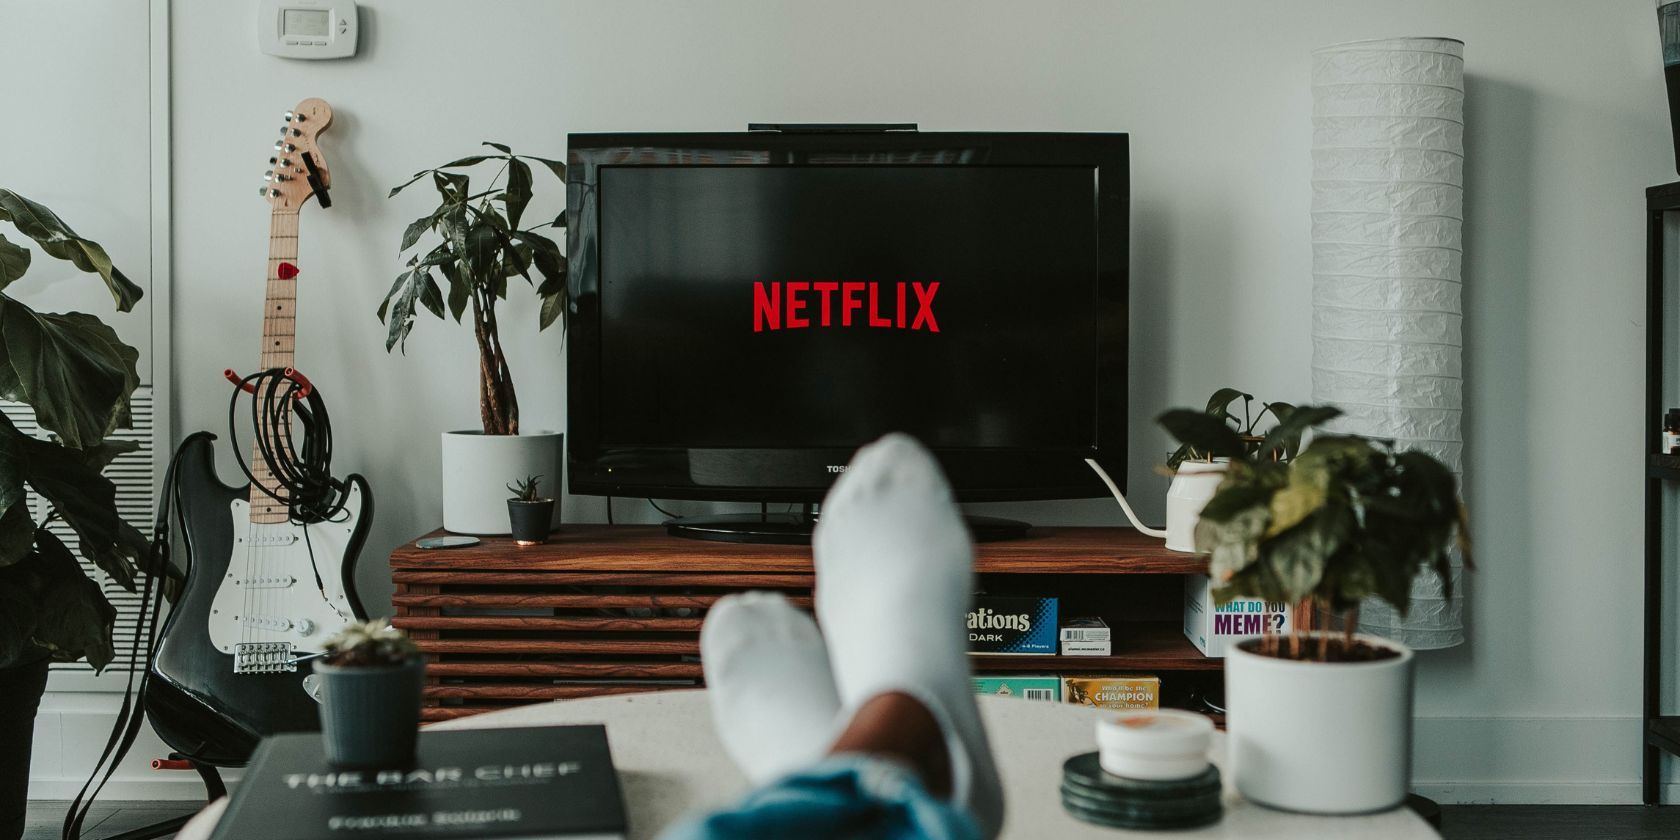 A person lounging on the sofa, their feet visible, with Netflix on the TV screen.